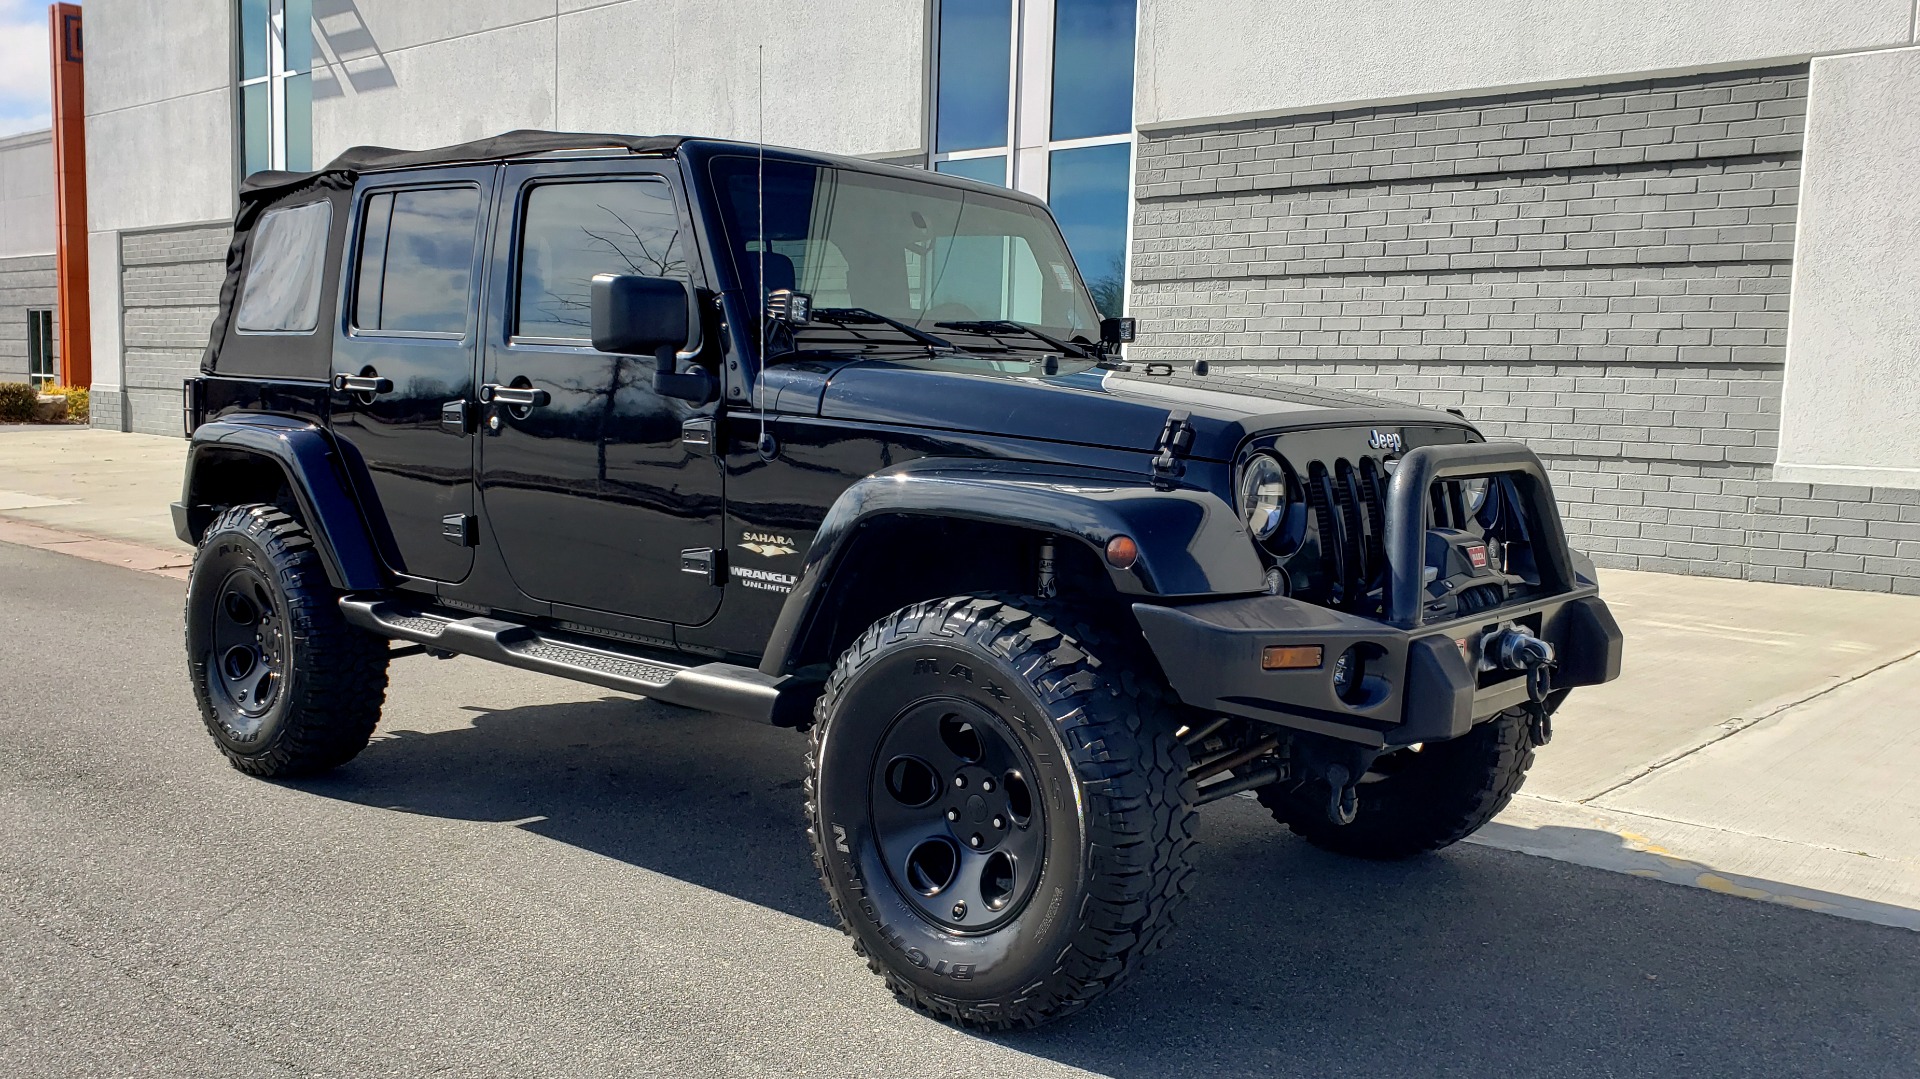 Used 2014 Jeep WRANGLER UNLIMITED SAHARA 4X4 / 3.6L V6 / 5-SPD AUTO / NAV / TOW PKG / SOFT-TOP for sale Sold at Formula Imports in Charlotte NC 28227 4